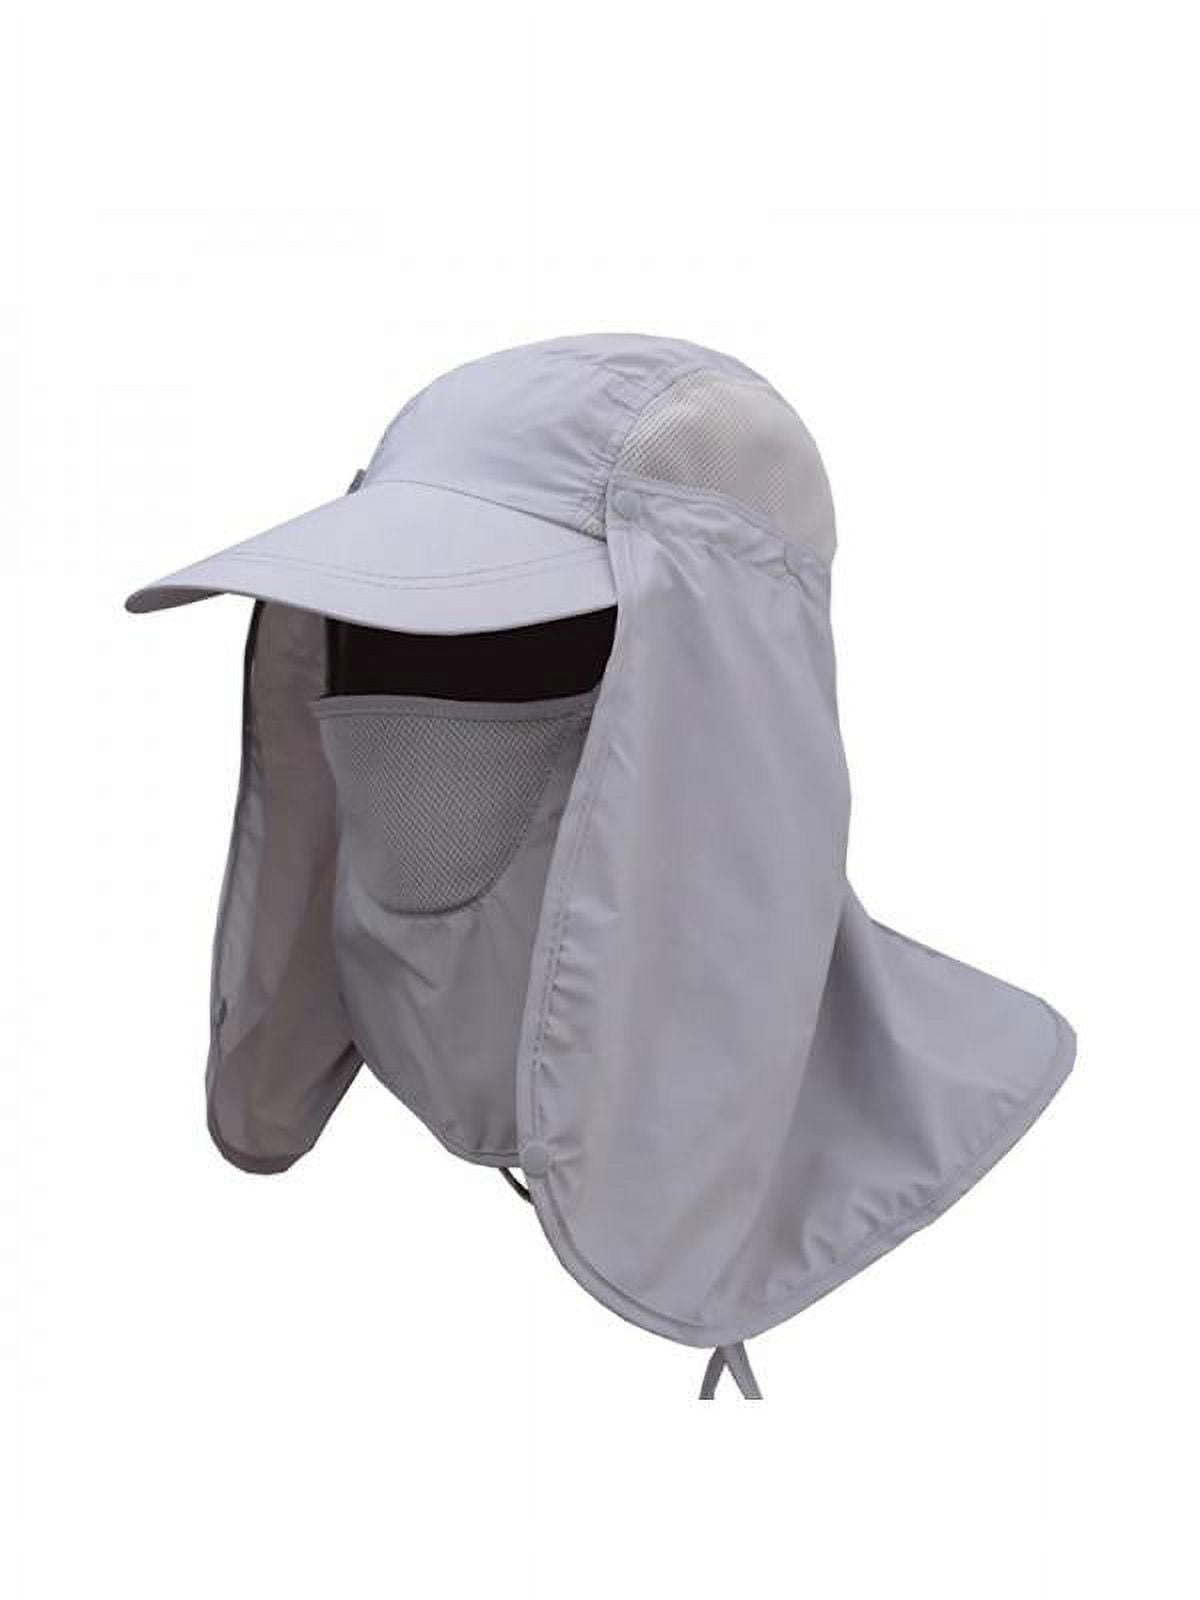 Foldable Sun Cap, Fishing Hats, Sunshade UV Protection Caps with Neck Flap  Face Shield 